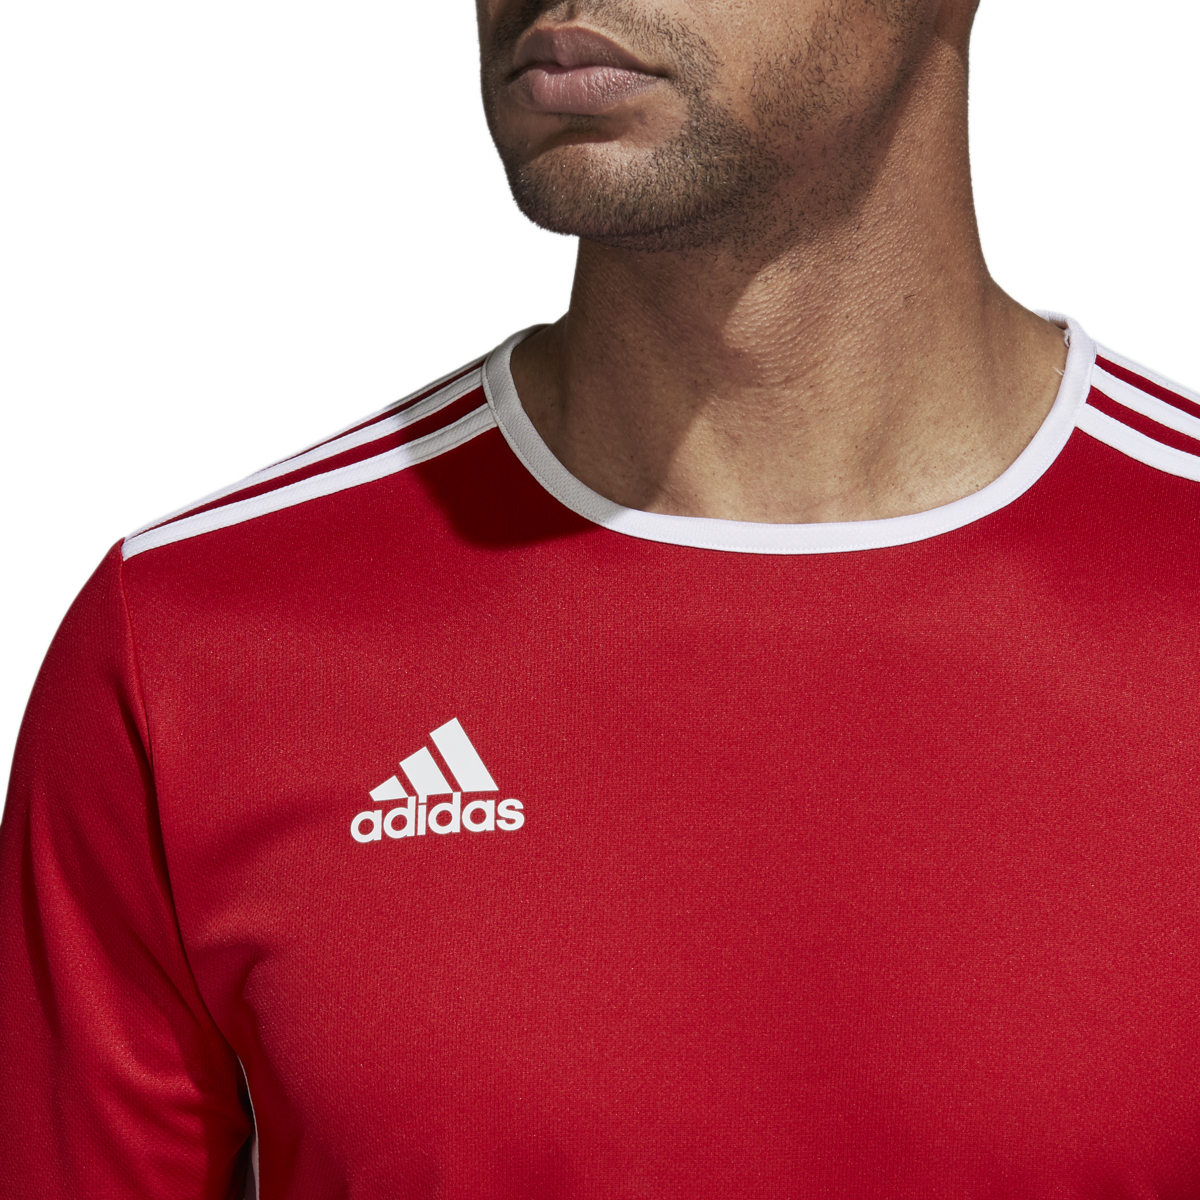 Men's Adidas Entrada 18 Soccer Jersey Red/White - XL - image 4 of 6